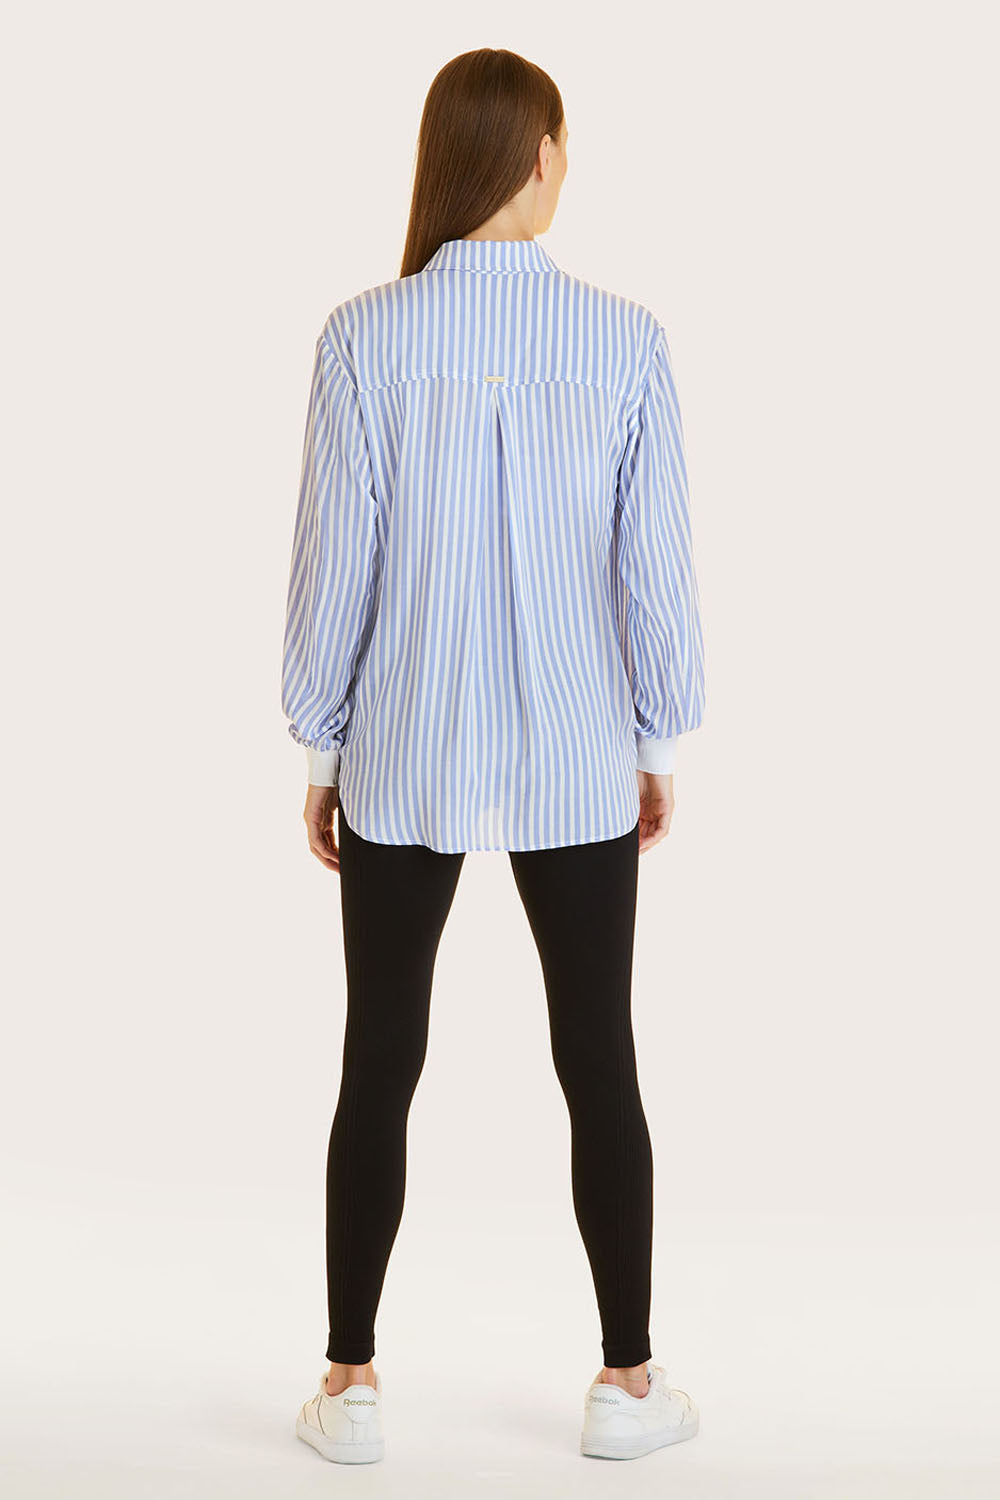 Alala women's collared blouse in blue and white stripe